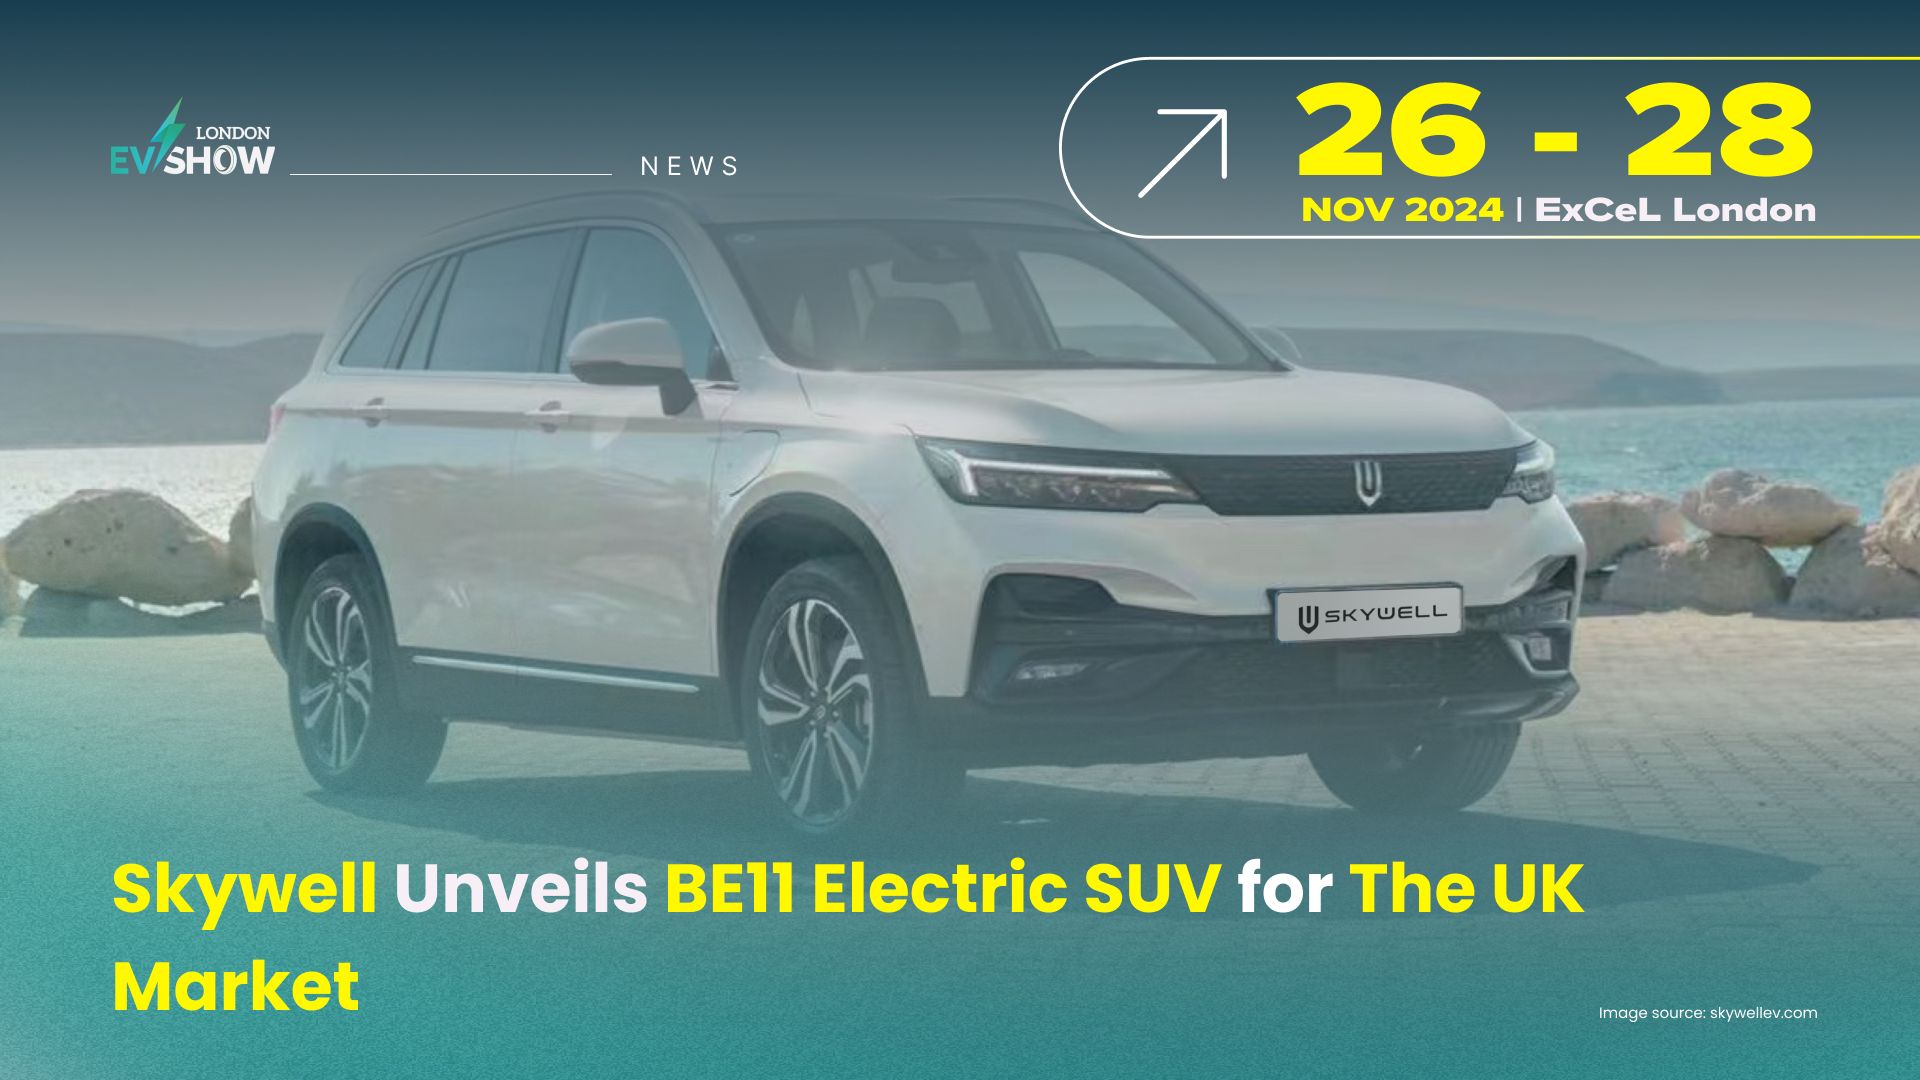 Skywell Unveils BE11 Electric SUV for The UK Market